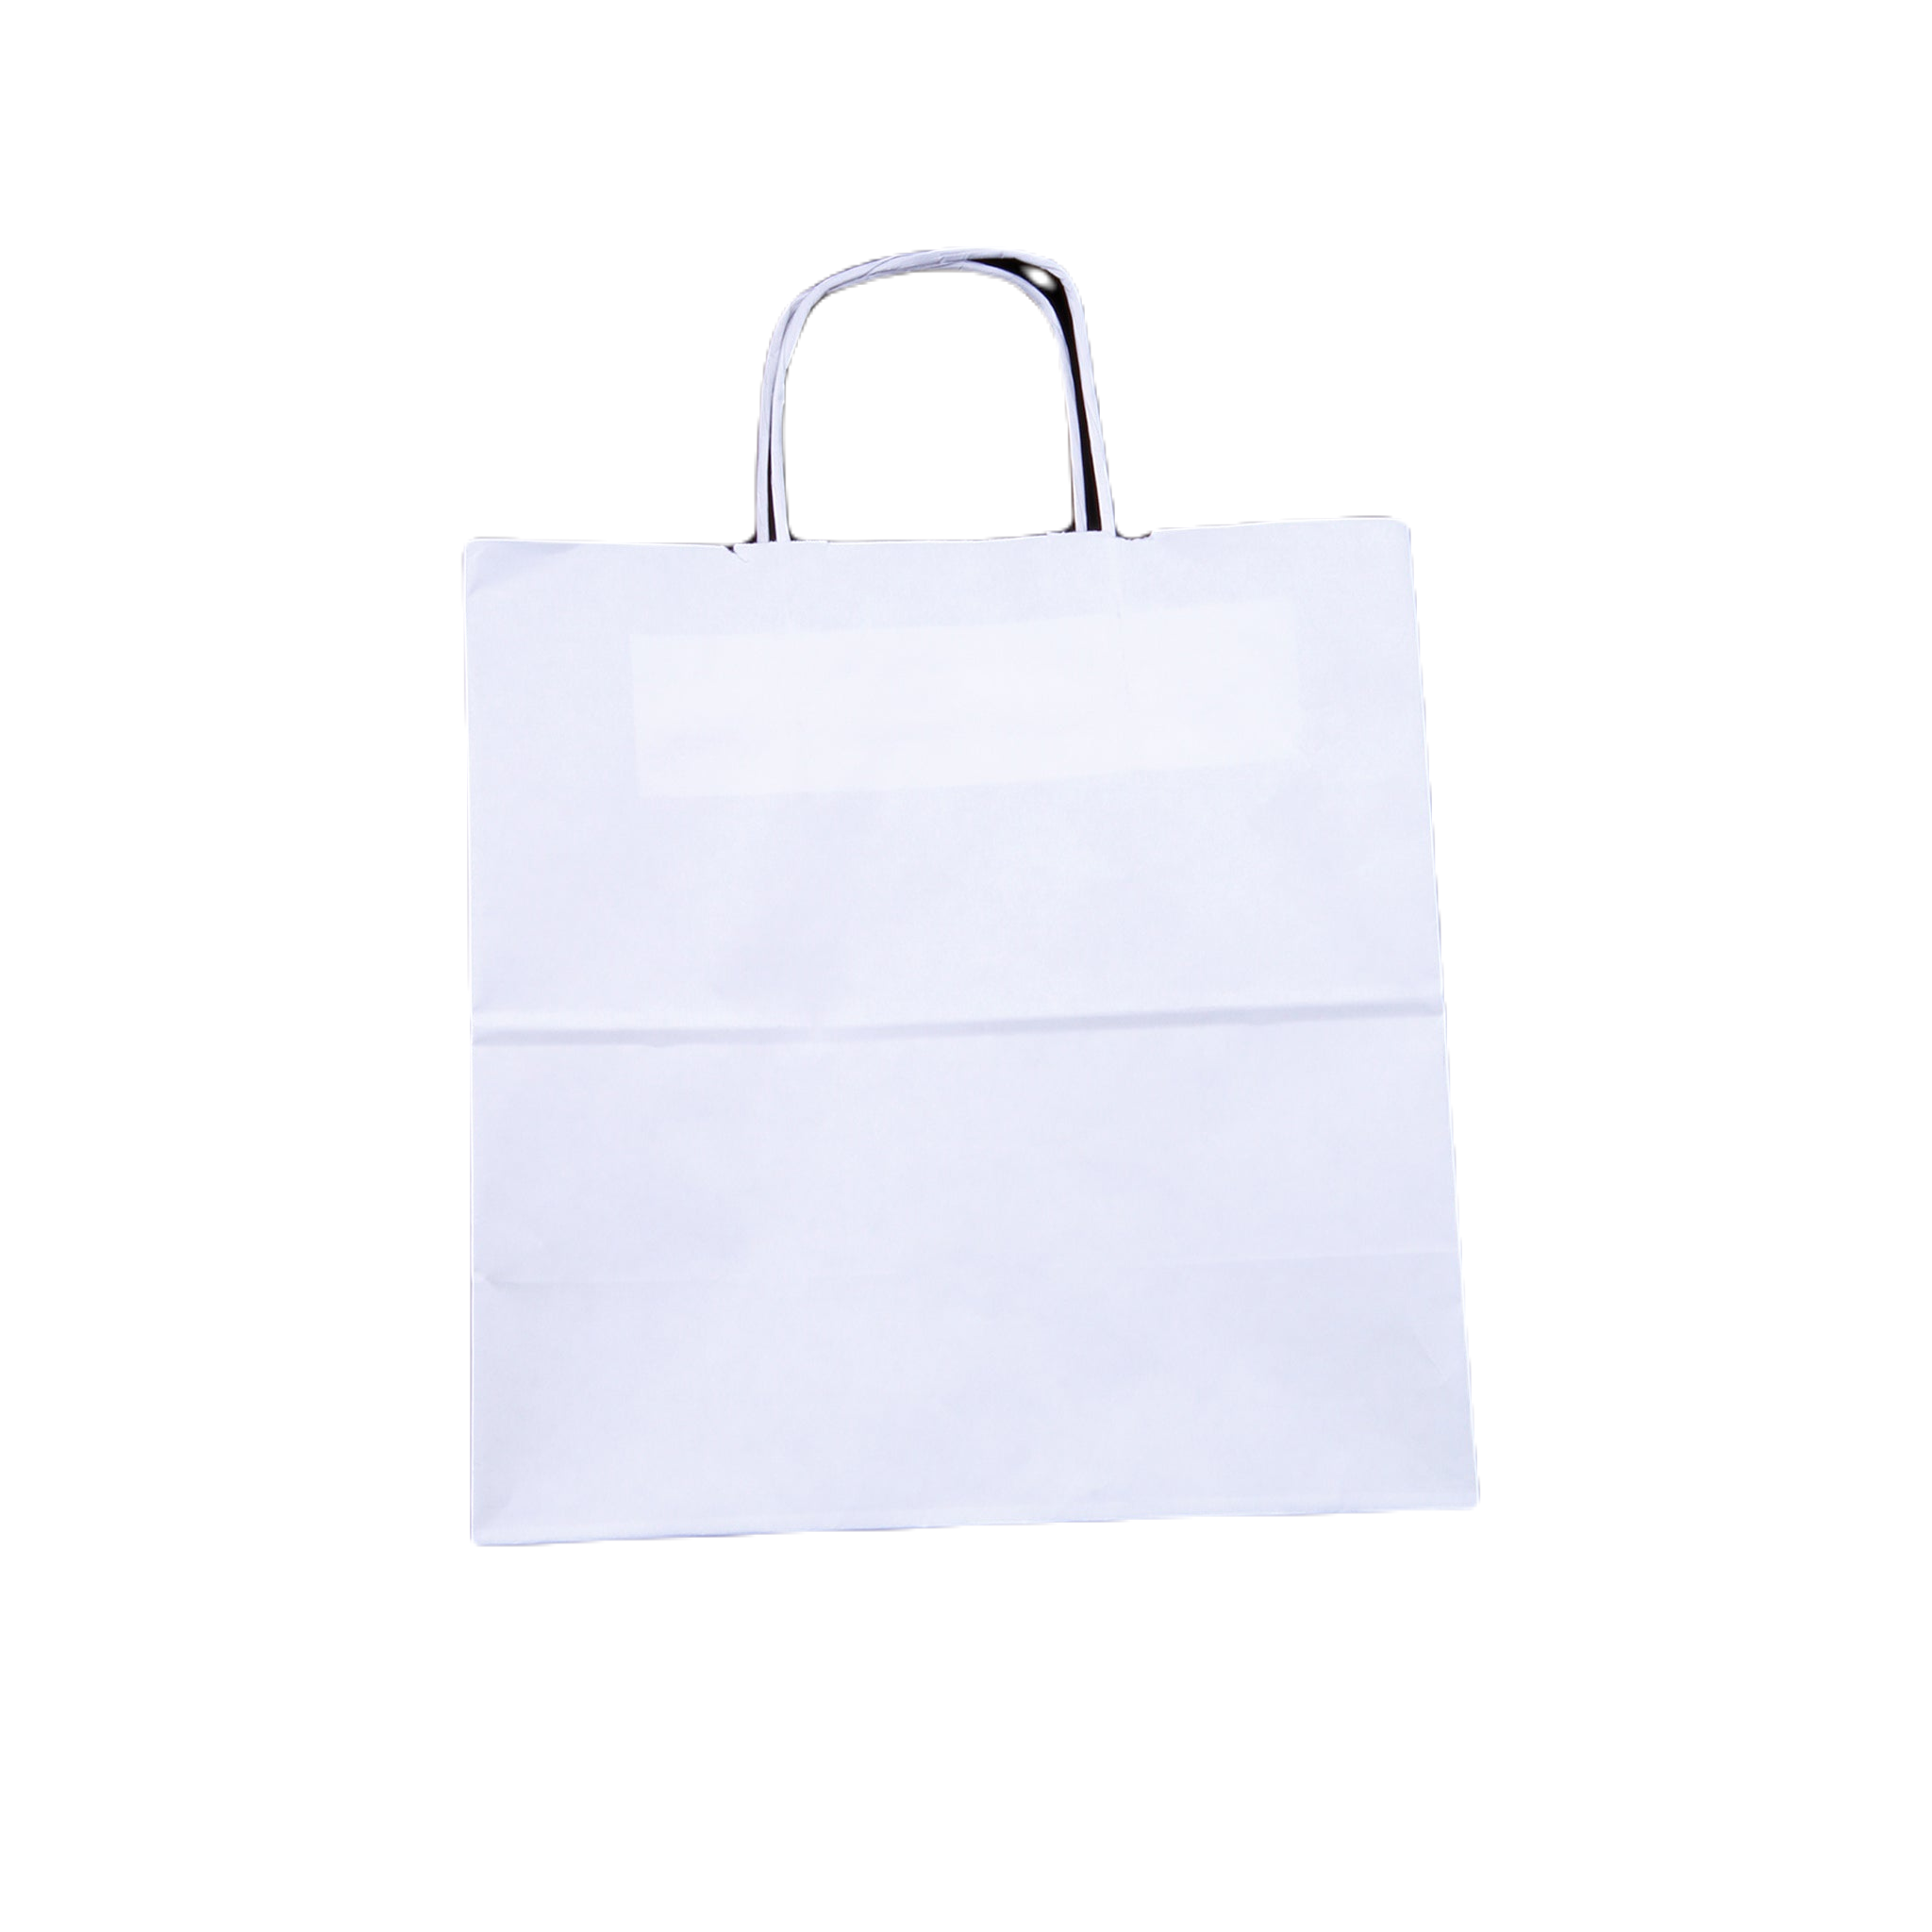 250 Pieces Paper Bag White Twisted Handle 32*12*34 Cm - hotpack.bh